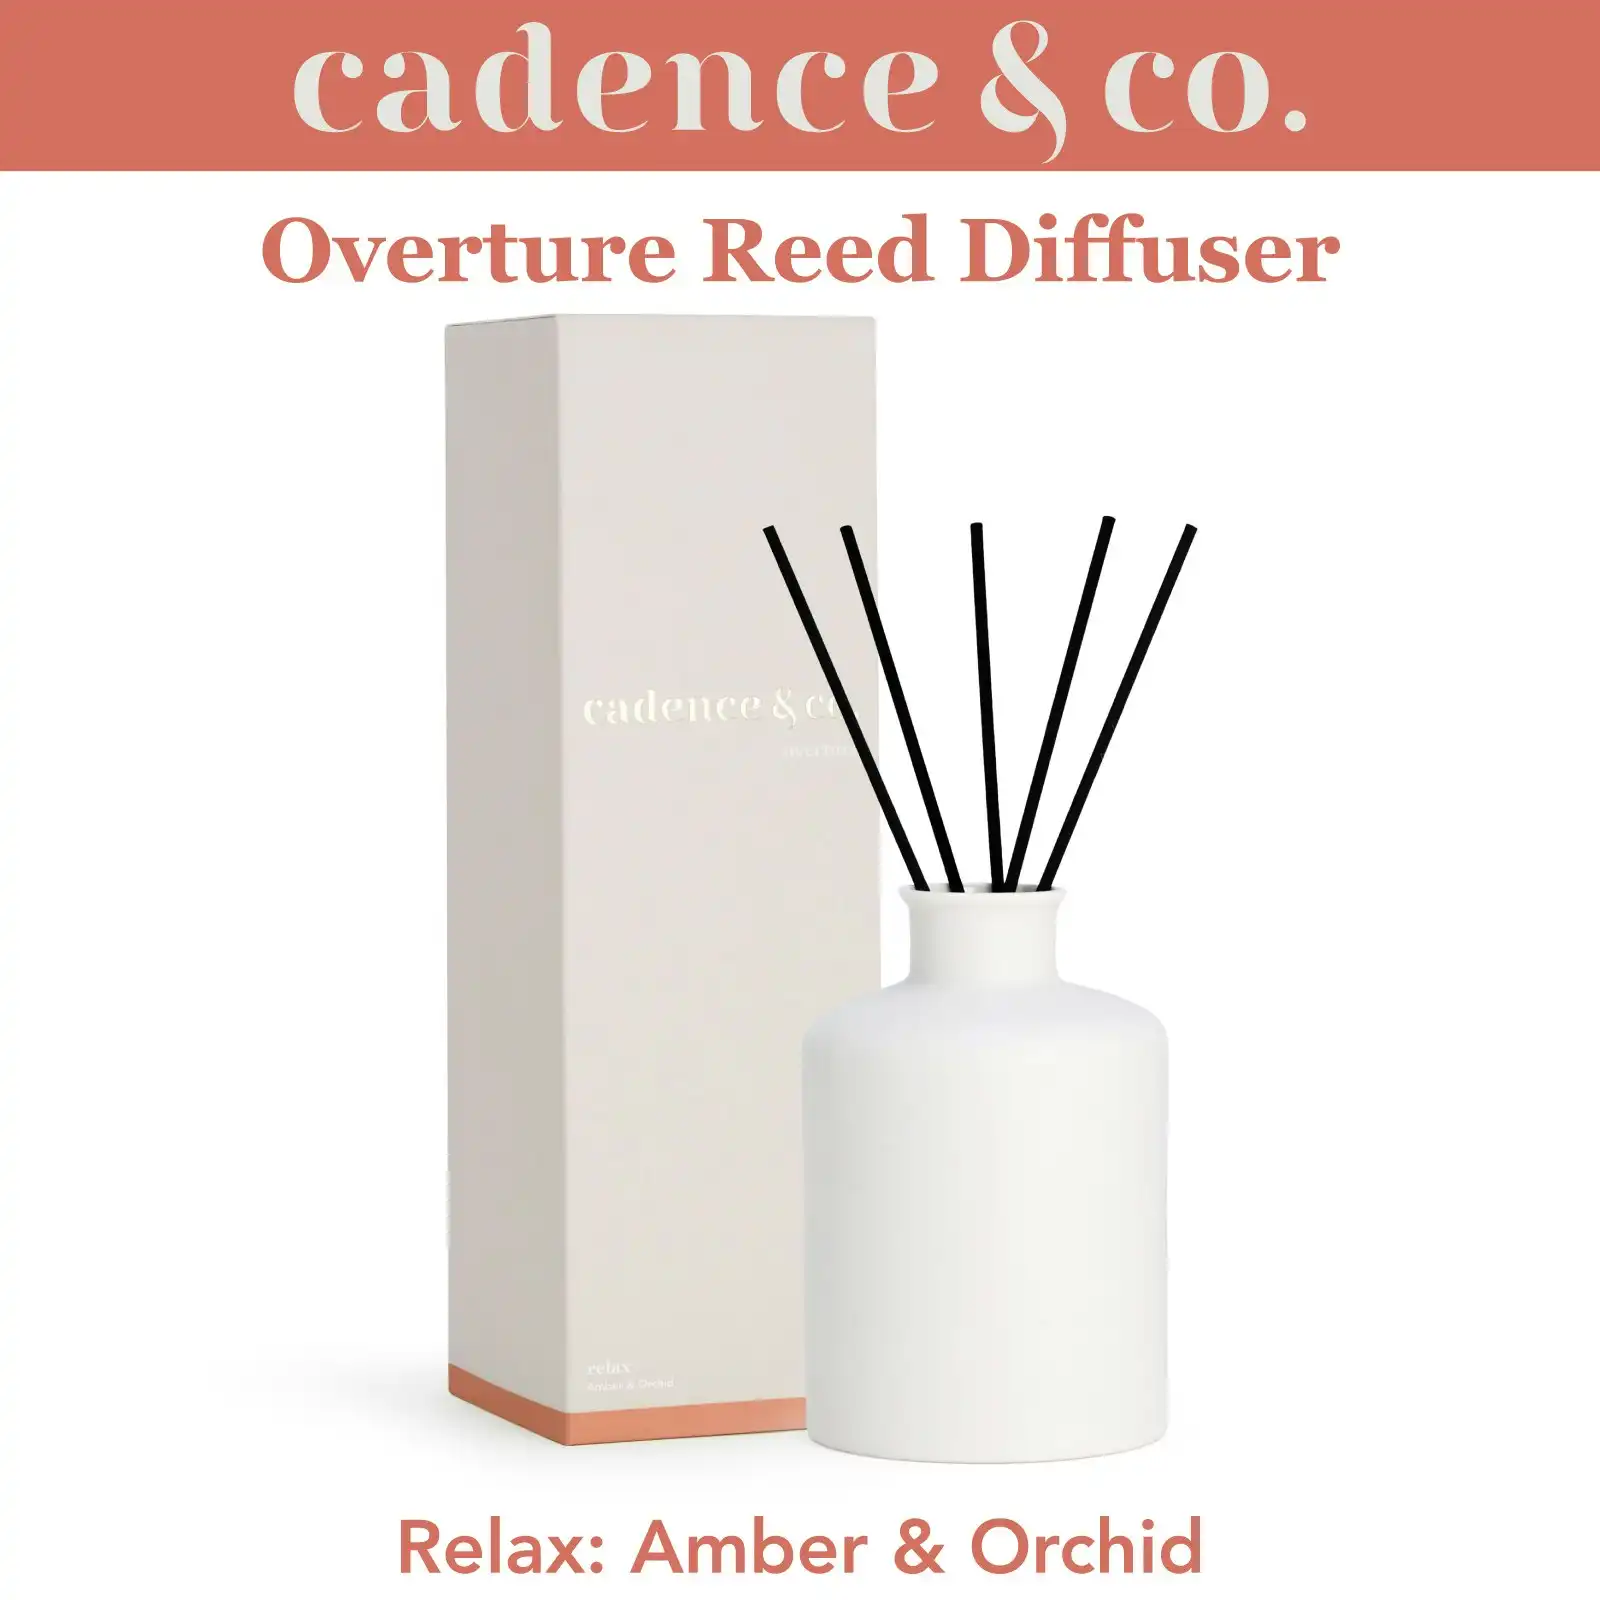 Cadence & Co Overture Reed Diffuser Relax: Amber & Orchid Natural Room Freshener w/ Essential Oils